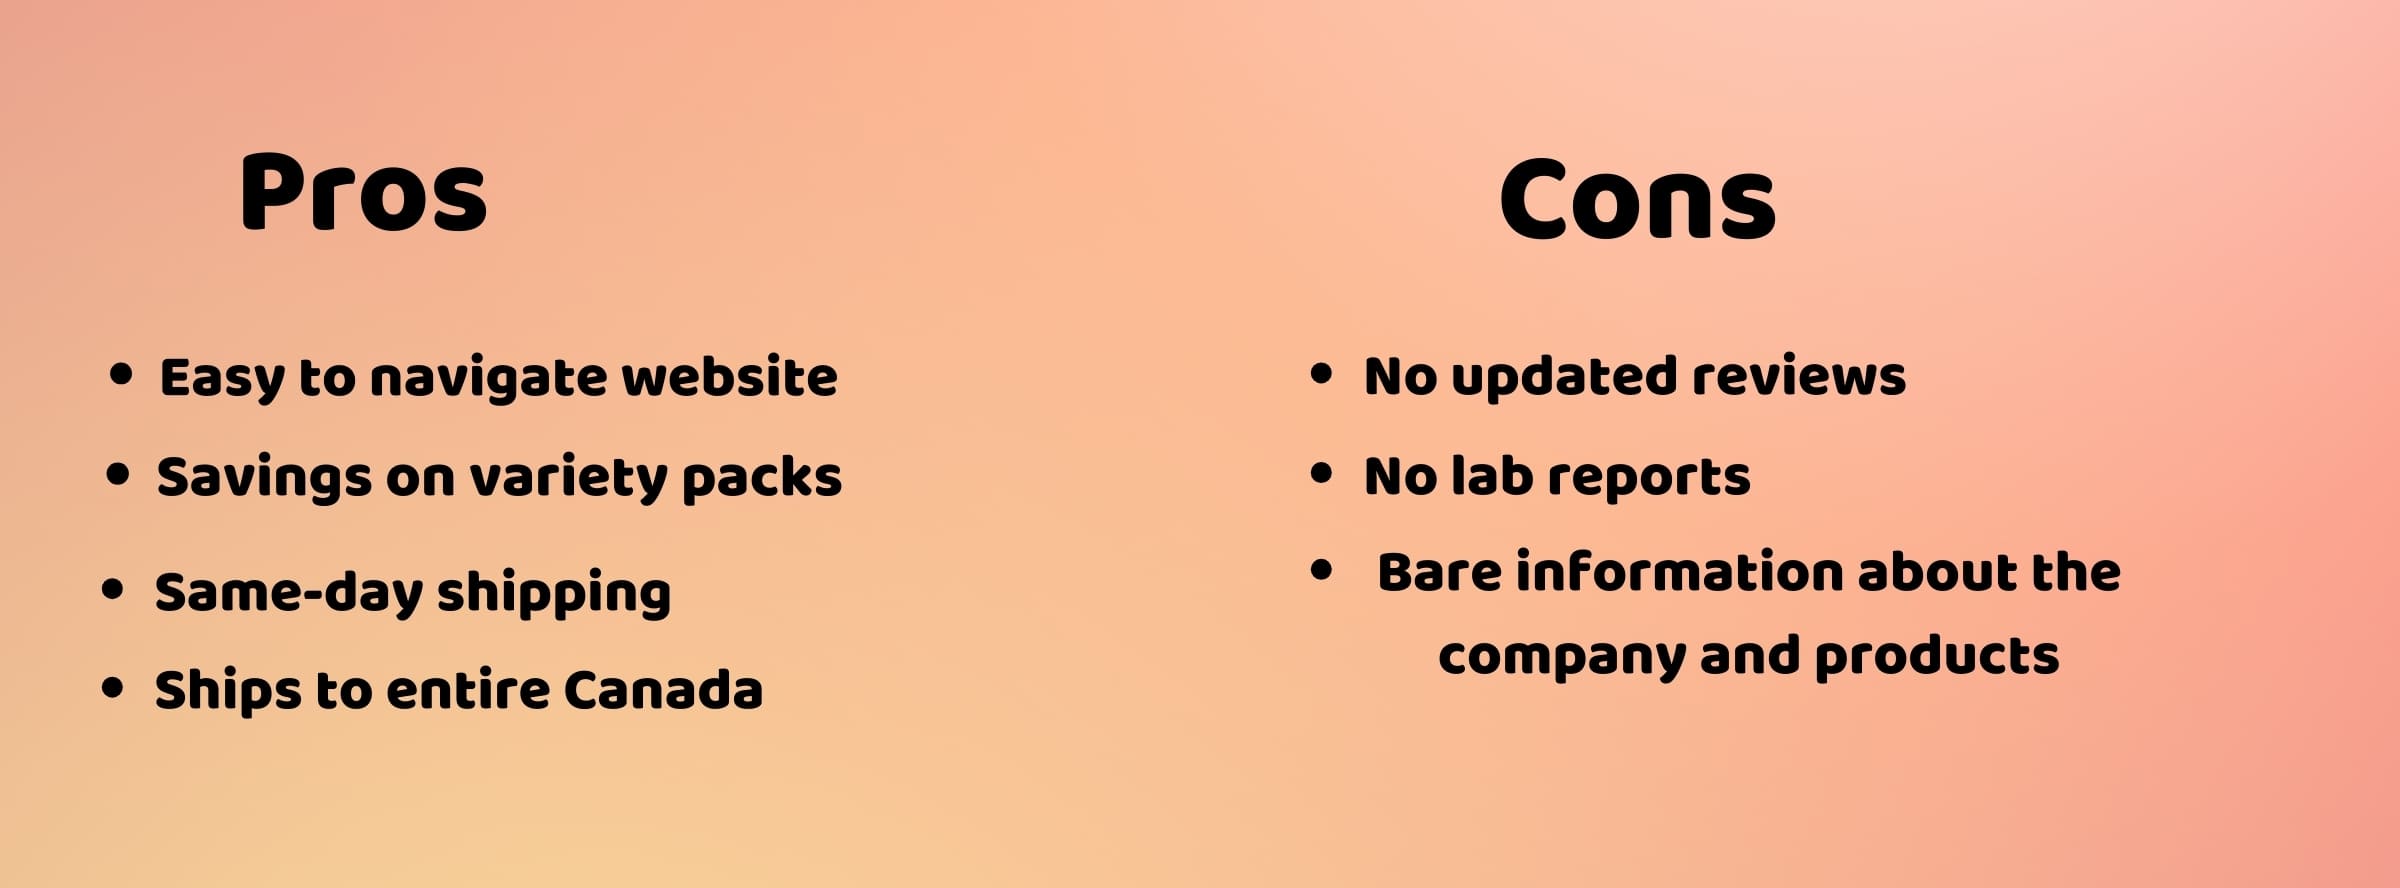 image of pros and cons